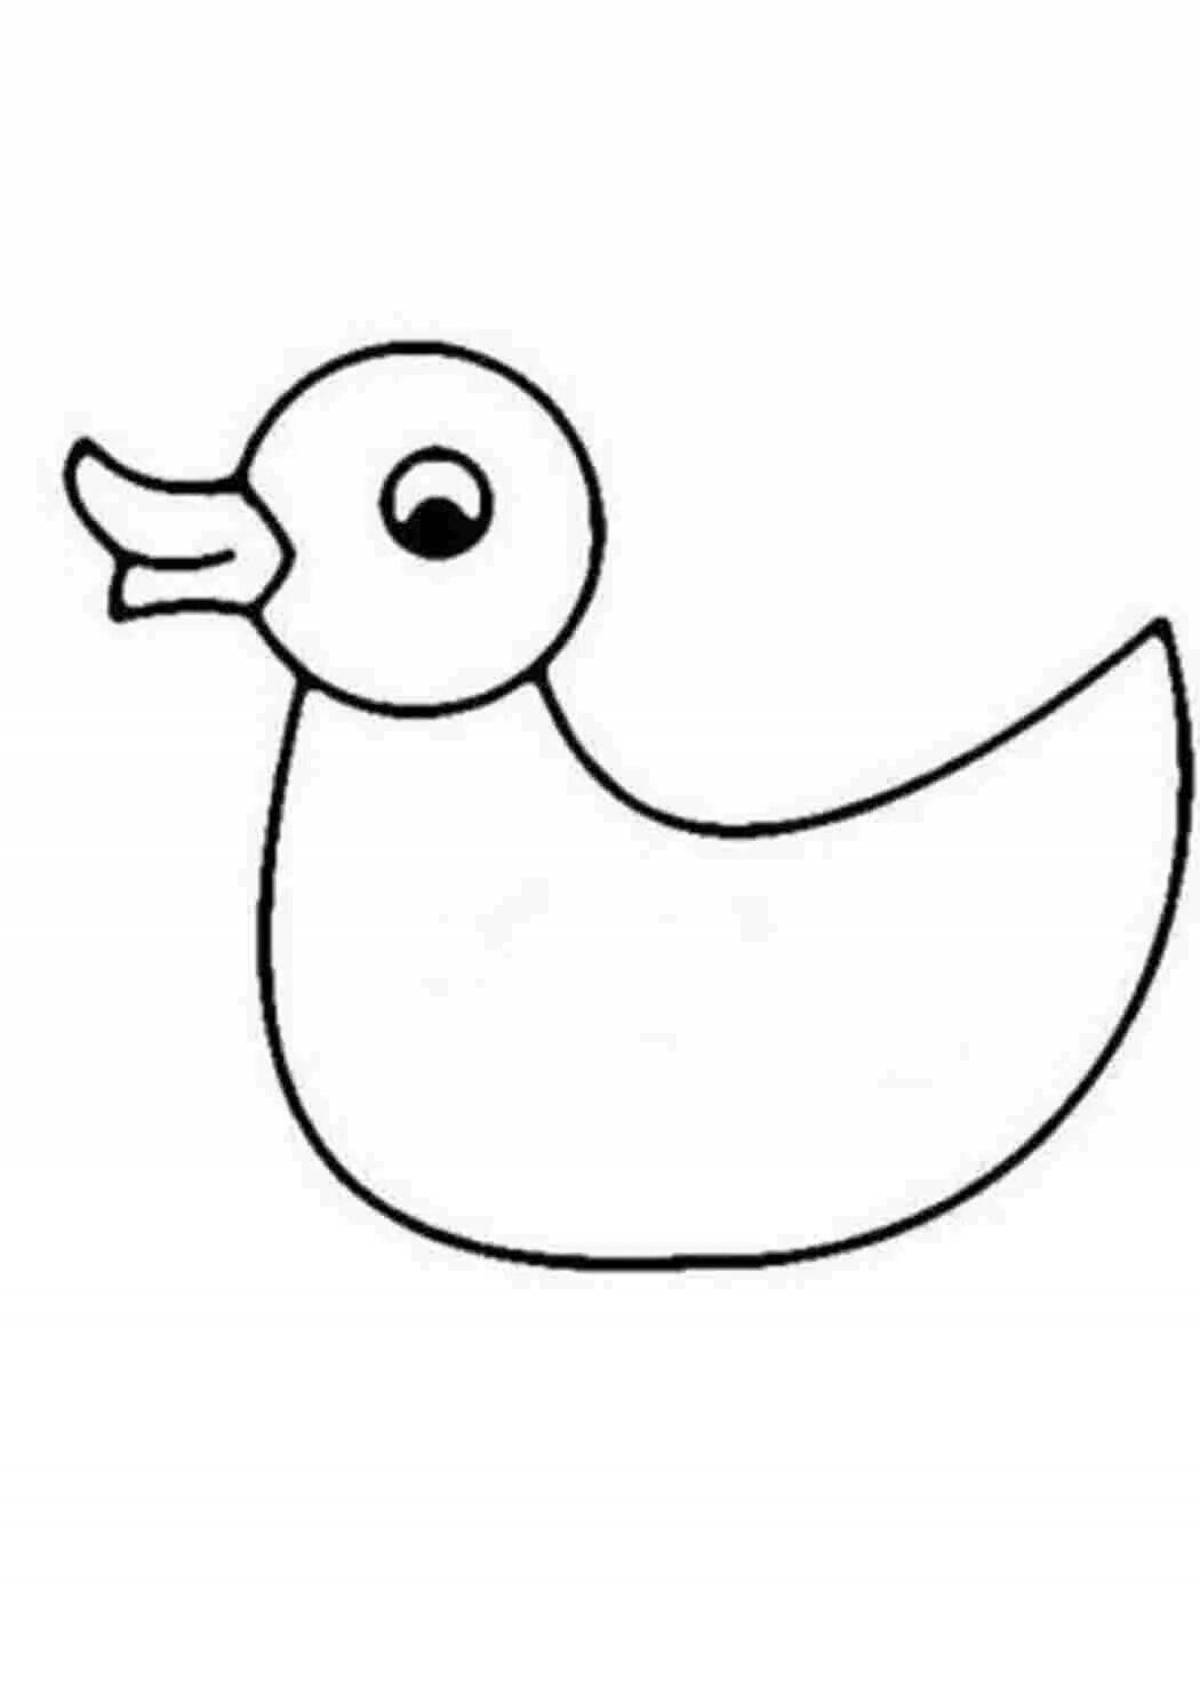 Creative coloring Dymkovo duck for children 3-4 years old